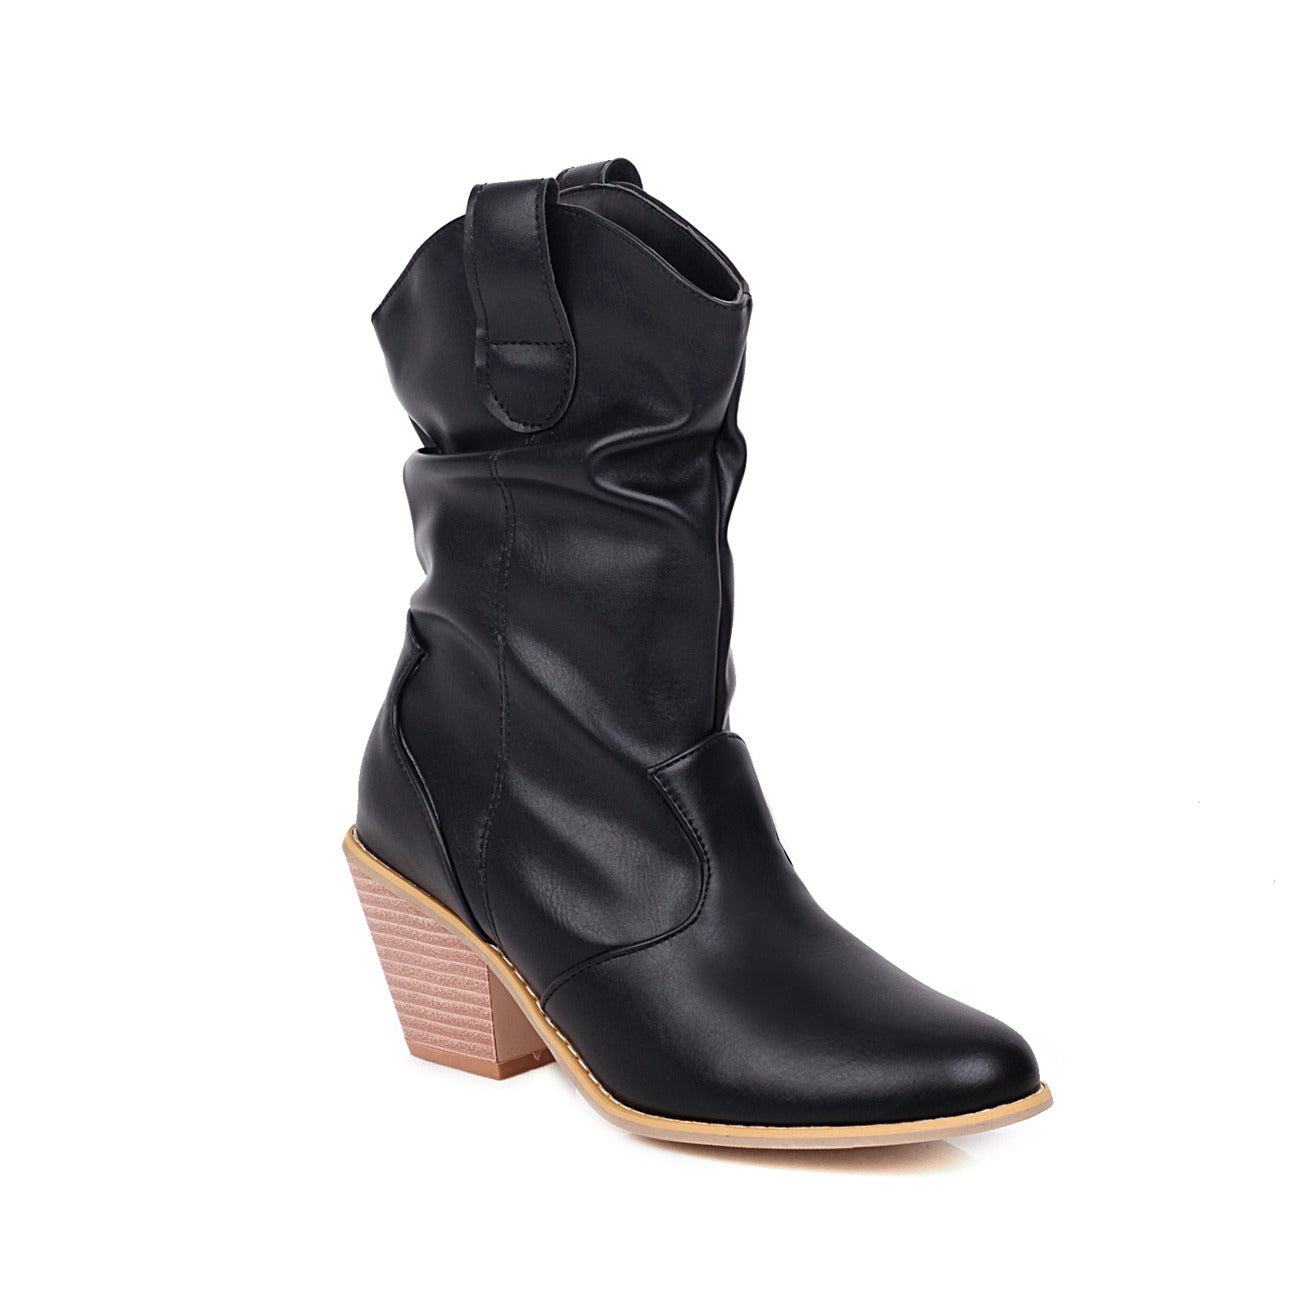 Autumn And Winter Wood Grain Thick High-heeled Women's Boots